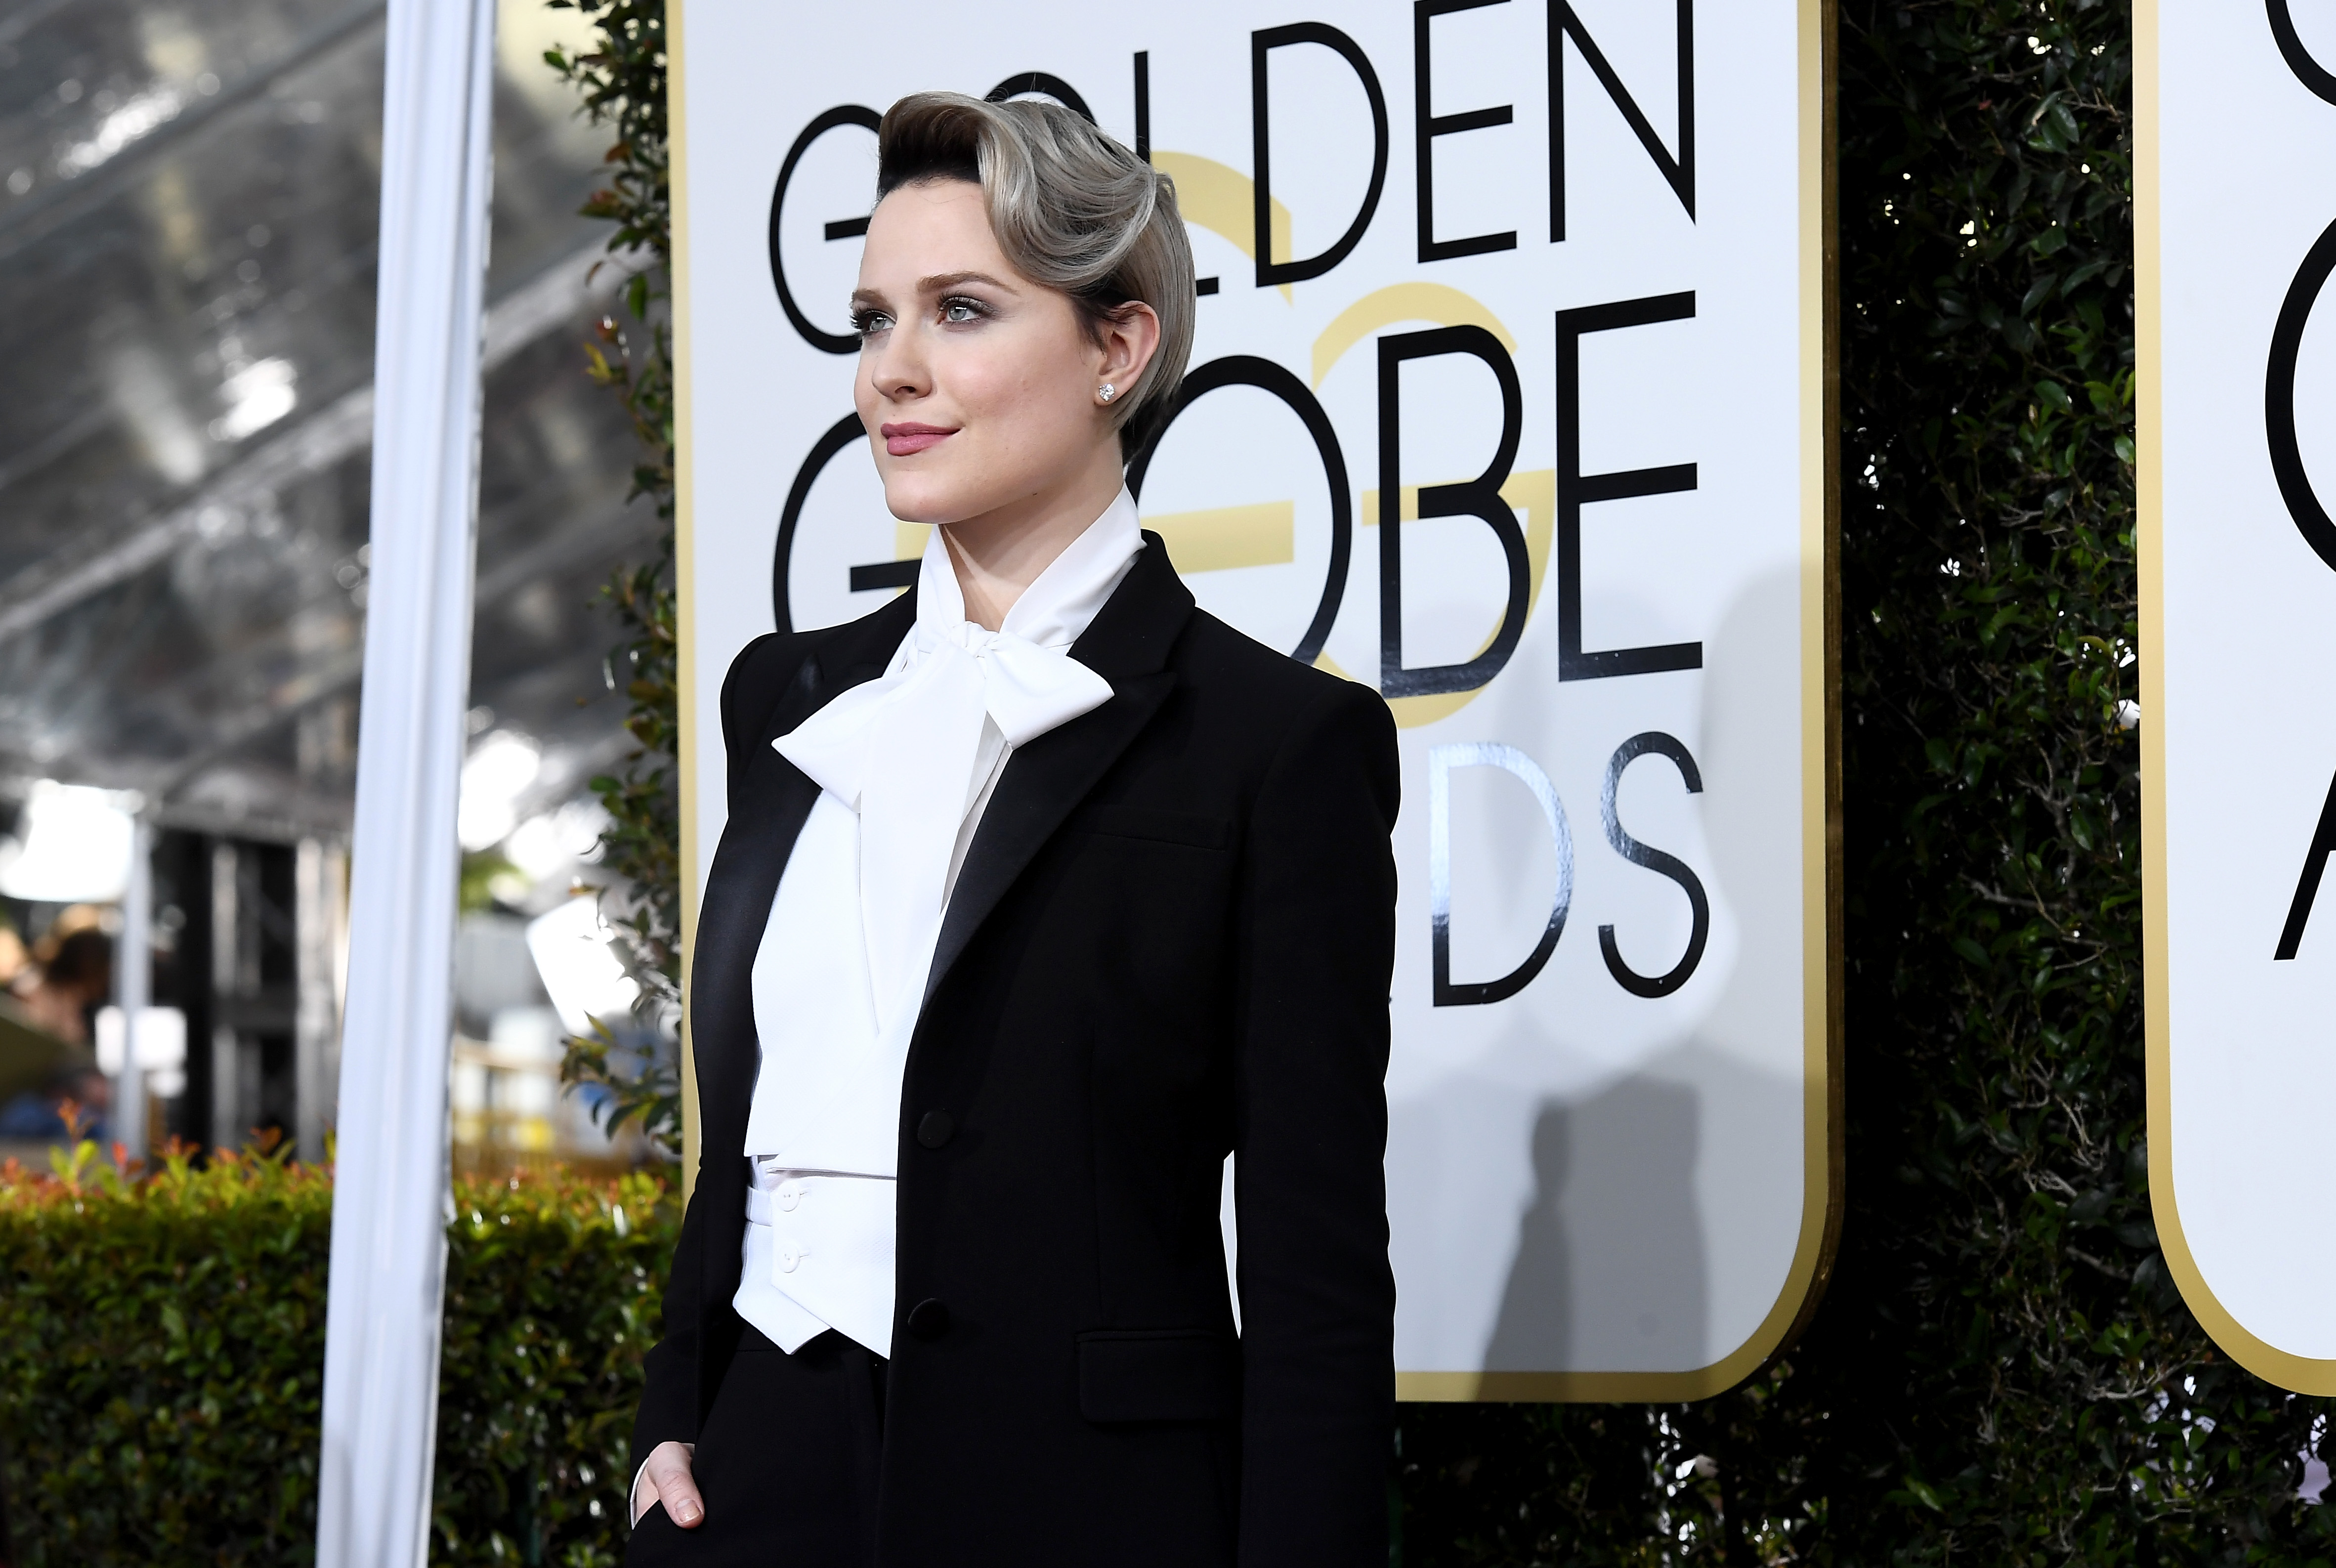 Actress Evan Rachel Wood arrives to the 74th Annual Golden Globe Awards held at the Beverly Hilton Hotel in Beverly Hills, Calif., on Jan. 8, 2017 (Kevork Djansezian—NBC/NBCU Photo Bank/Getty Images)